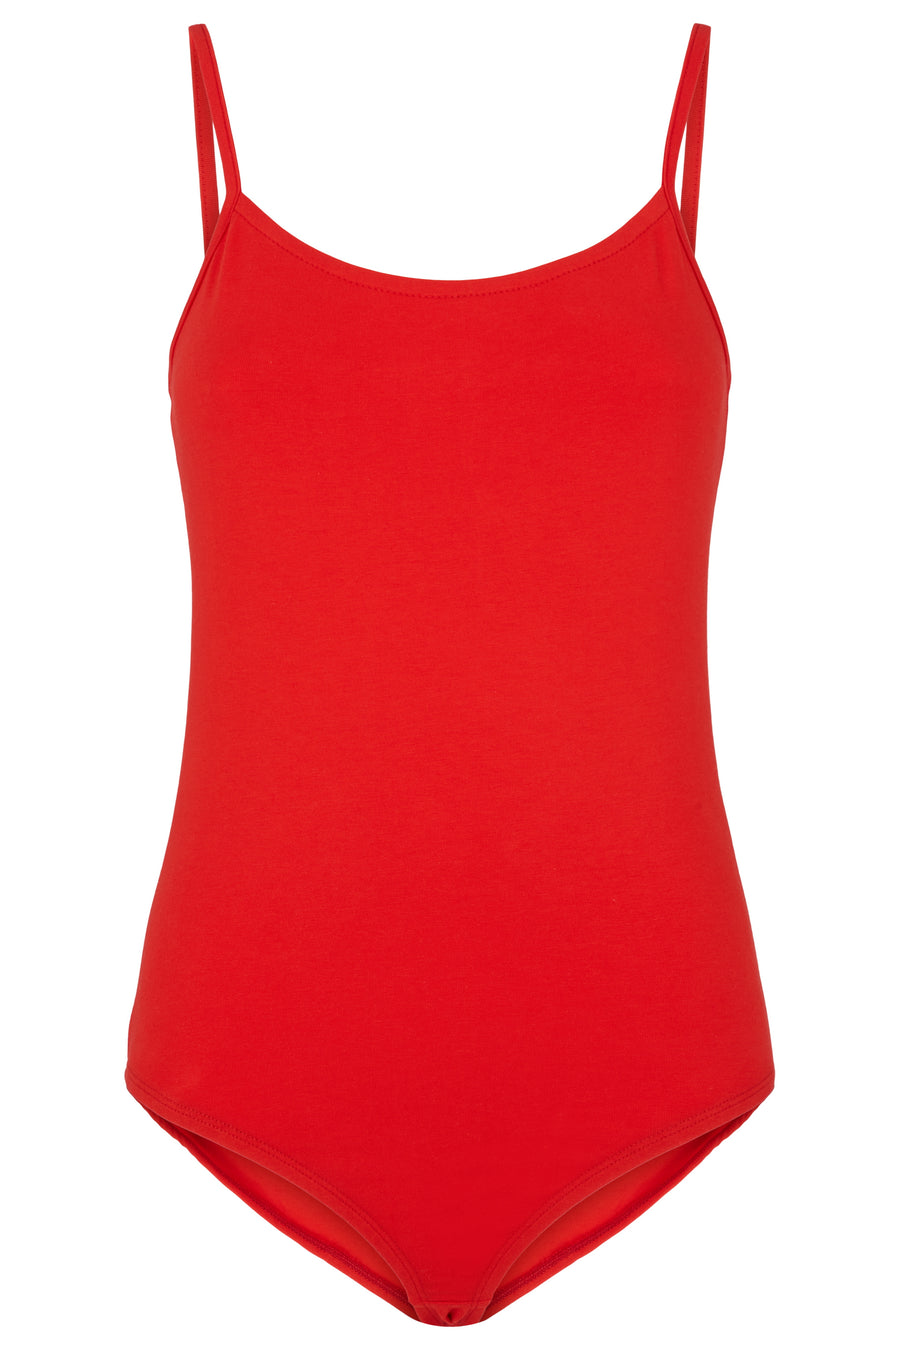 People Tree Fair Trade, Ethical & Sustainable Marika Bodysuit in Red 95% organic certified cotton, 5% elastane